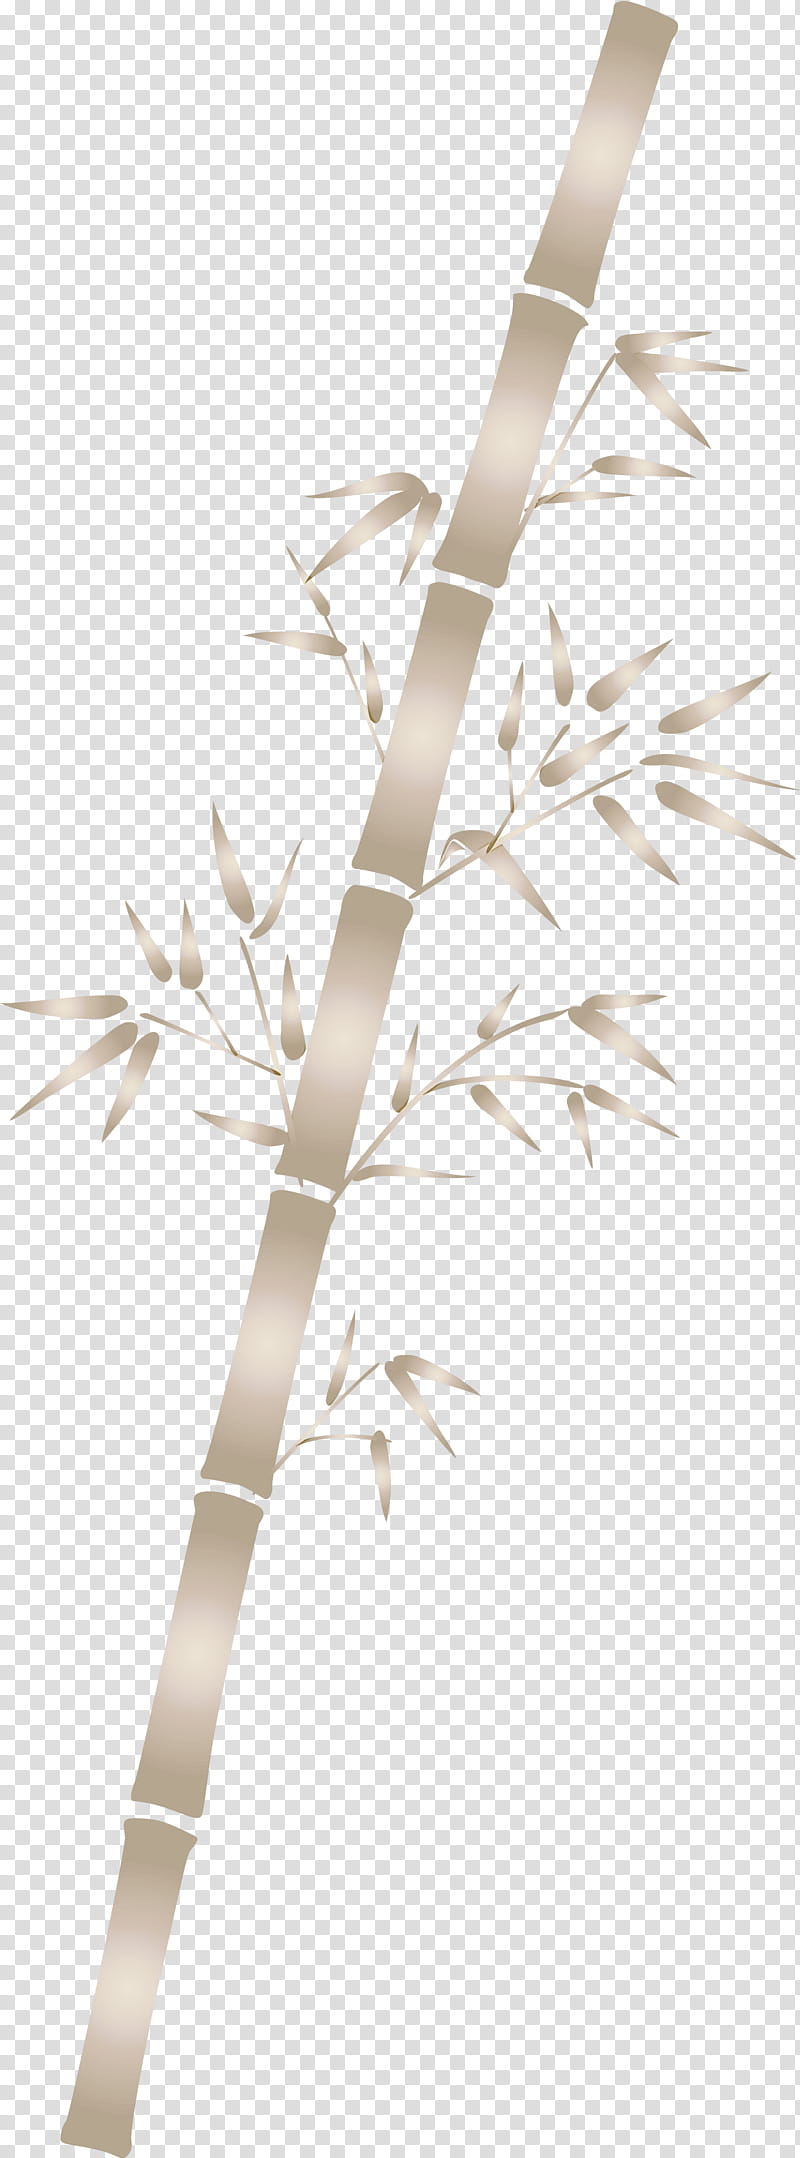 bamboo leaf, Branch, Twig, Tree, Plant, Grass Family, Plant Stem, Flower transparent background PNG clipart